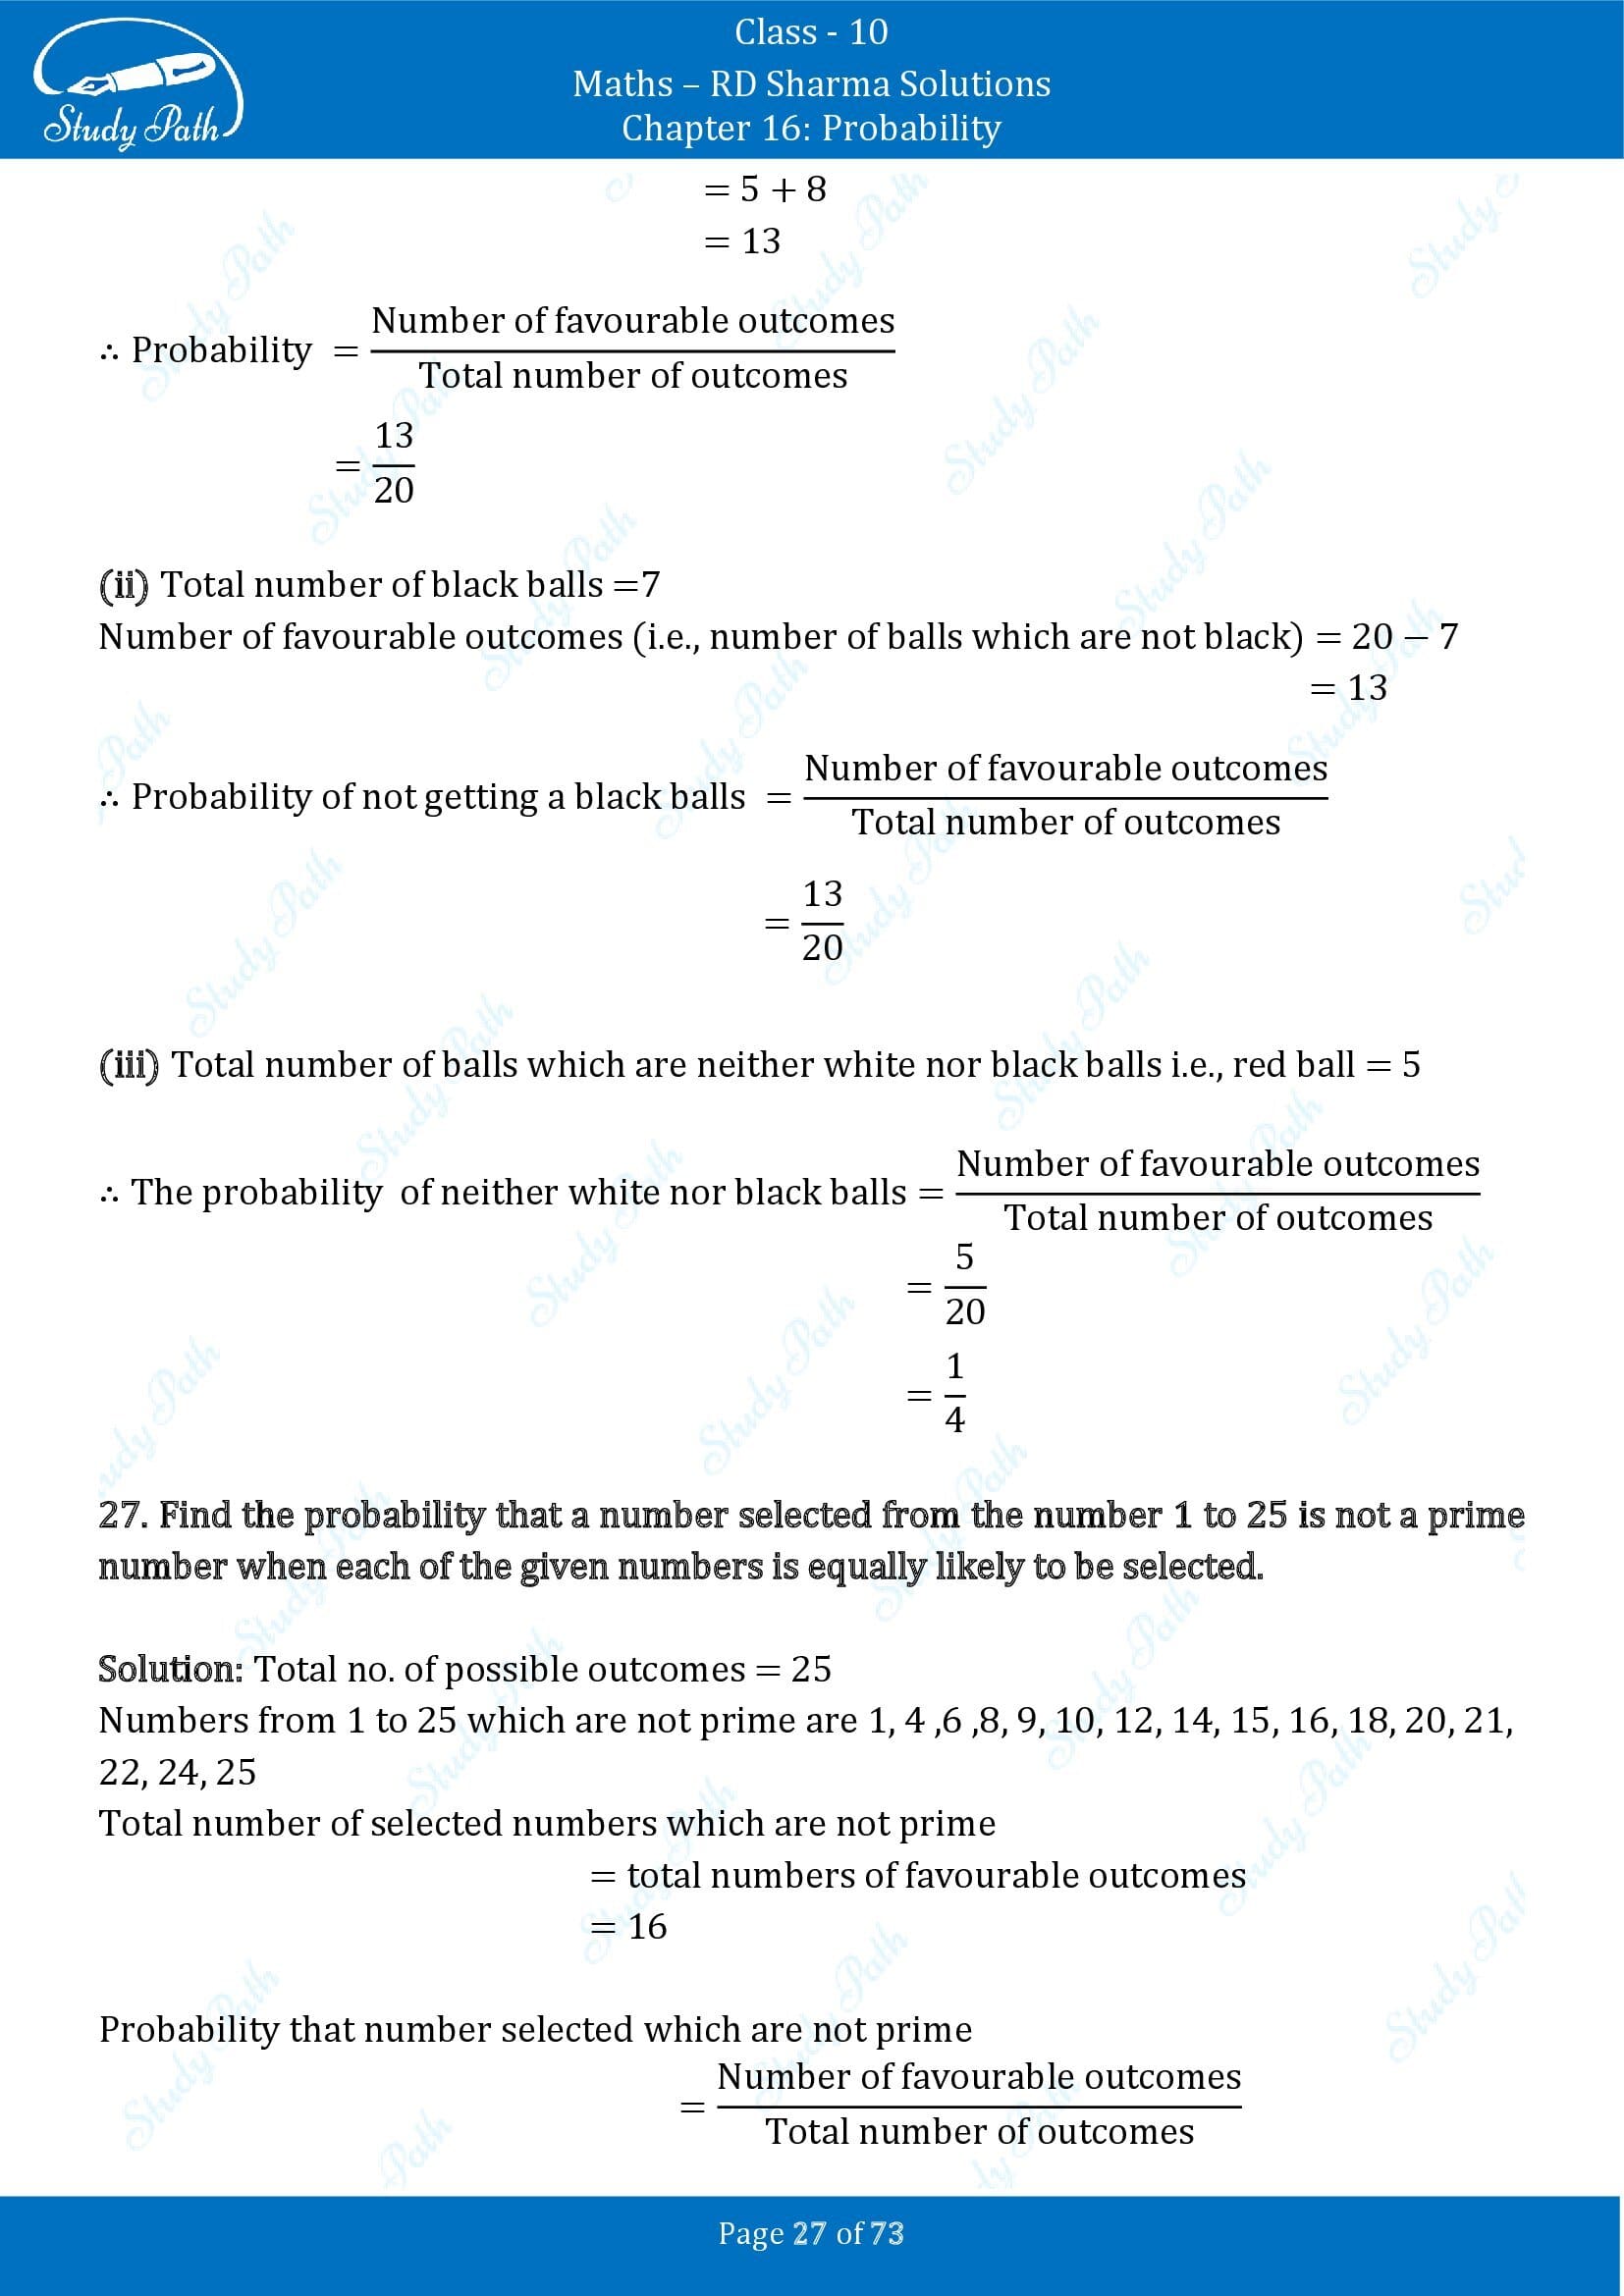 RD Sharma Solutions Class 10 Chapter 16 Probability Exercise 16.1 00027